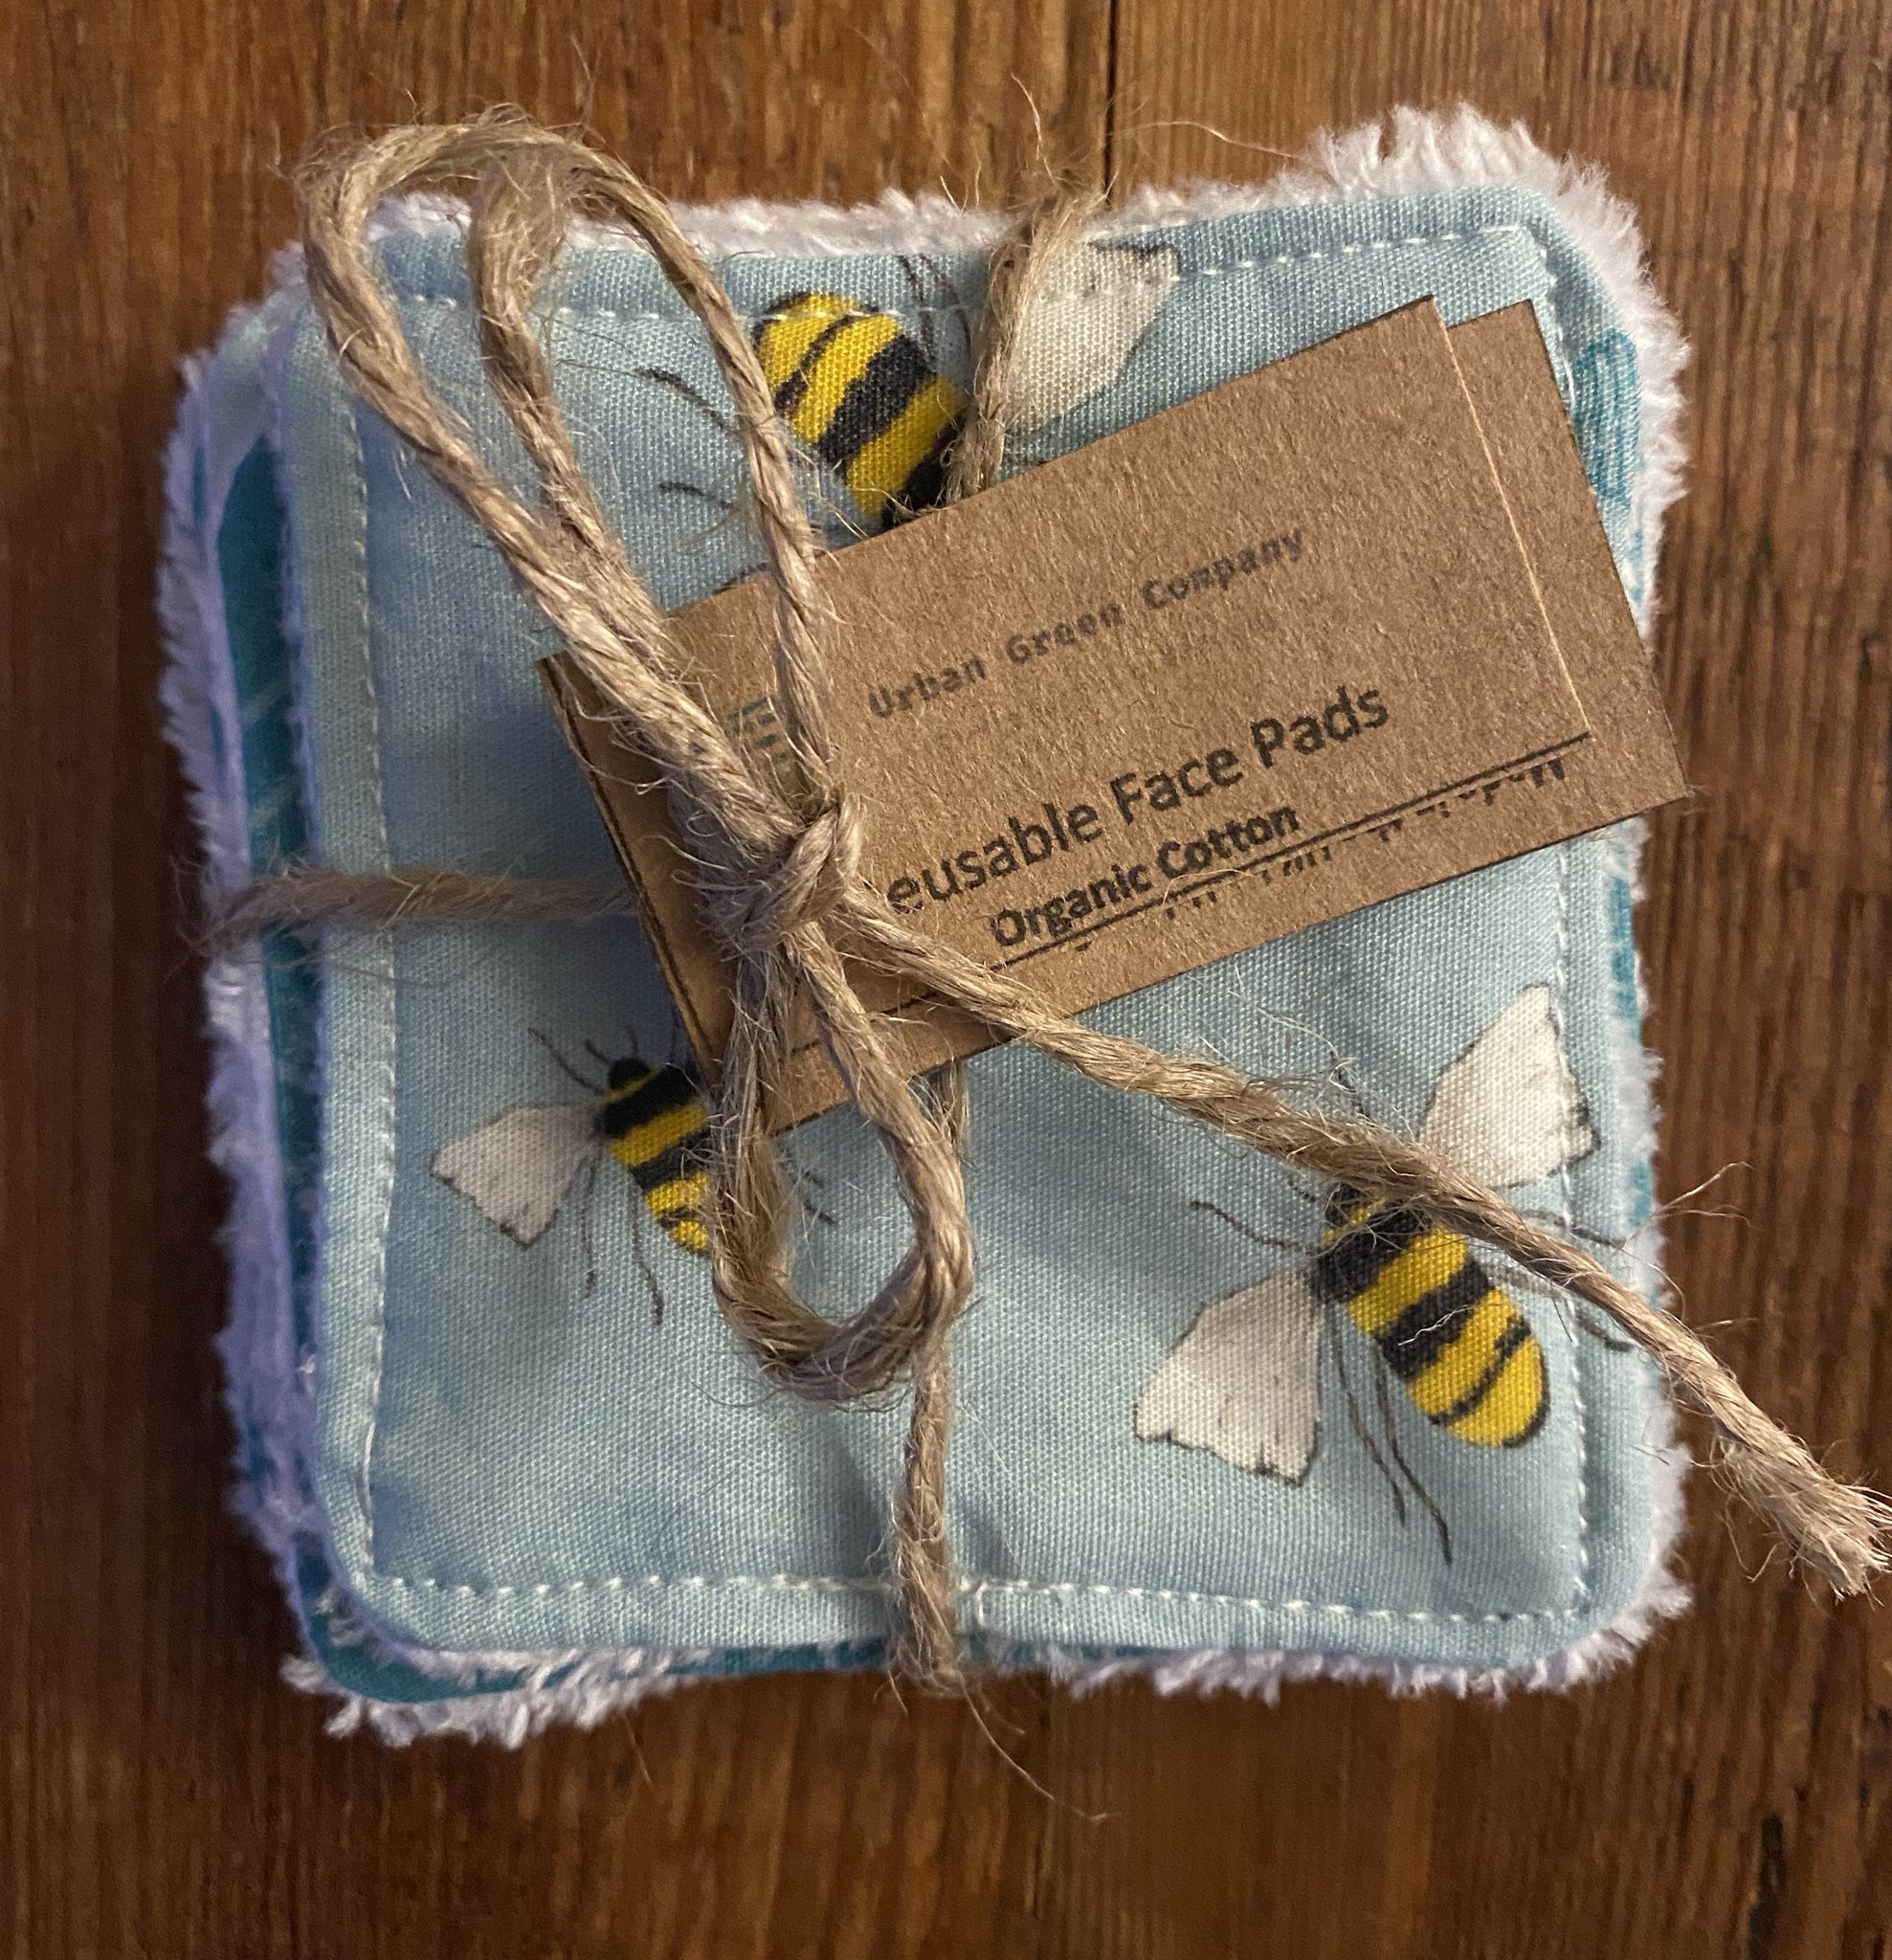 Eco Friendly Facial Pads, Reusable Facial Wipes, Make Up Remover Pads - Organic Cotton Bees